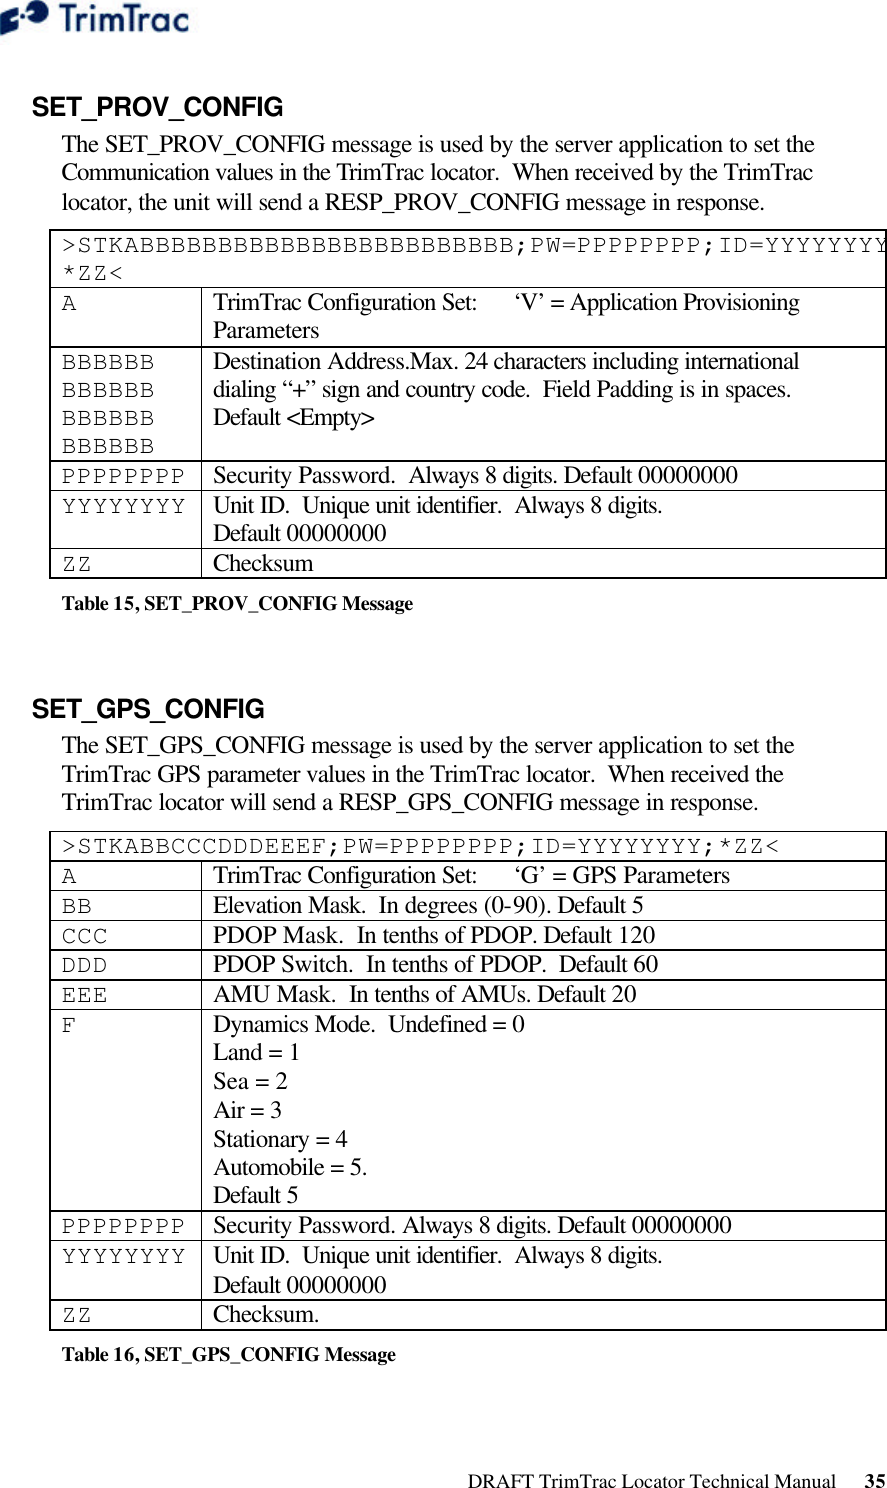  DRAFT TrimTrac Locator Technical Manual      35 SET_PROV_CONFIG  The SET_PROV_CONFIG message is used by the server application to set the Communication values in the TrimTrac locator.  When received by the TrimTrac locator, the unit will send a RESP_PROV_CONFIG message in response. &gt;STKABBBBBBBBBBBBBBBBBBBBBBBB;PW=PPPPPPPP;ID=YYYYYYYY;*ZZ&lt; A TrimTrac Configuration Set: ‘V’ = Application Provisioning Parameters BBBBBB BBBBBB BBBBBB BBBBBB Destination Address.Max. 24 characters including international dialing “+” sign and country code.  Field Padding is in spaces. Default &lt;Empty&gt; PPPPPPPP Security Password.  Always 8 digits. Default 00000000 YYYYYYYY Unit ID.  Unique unit identifier.  Always 8 digits.  Default 00000000 ZZ Checksum Table 15, SET_PROV_CONFIG Message  SET_GPS_CONFIG  The SET_GPS_CONFIG message is used by the server application to set the TrimTrac GPS parameter values in the TrimTrac locator.  When received the TrimTrac locator will send a RESP_GPS_CONFIG message in response. &gt;STKABBCCCDDDEEEF;PW=PPPPPPPP;ID=YYYYYYYY;*ZZ&lt; A TrimTrac Configuration Set: ‘G’ = GPS Parameters BB Elevation Mask.  In degrees (0-90). Default 5 CCC PDOP Mask.  In tenths of PDOP. Default 120 DDD PDOP Switch.  In tenths of PDOP.  Default 60 EEE AMU Mask.  In tenths of AMUs. Default 20 F Dynamics Mode.  Undefined = 0 Land = 1 Sea = 2 Air = 3 Stationary = 4 Automobile = 5. Default 5 PPPPPPPP Security Password. Always 8 digits. Default 00000000 YYYYYYYY Unit ID.  Unique unit identifier.  Always 8 digits.  Default 00000000 ZZ Checksum.   Table 16, SET_GPS_CONFIG Message  